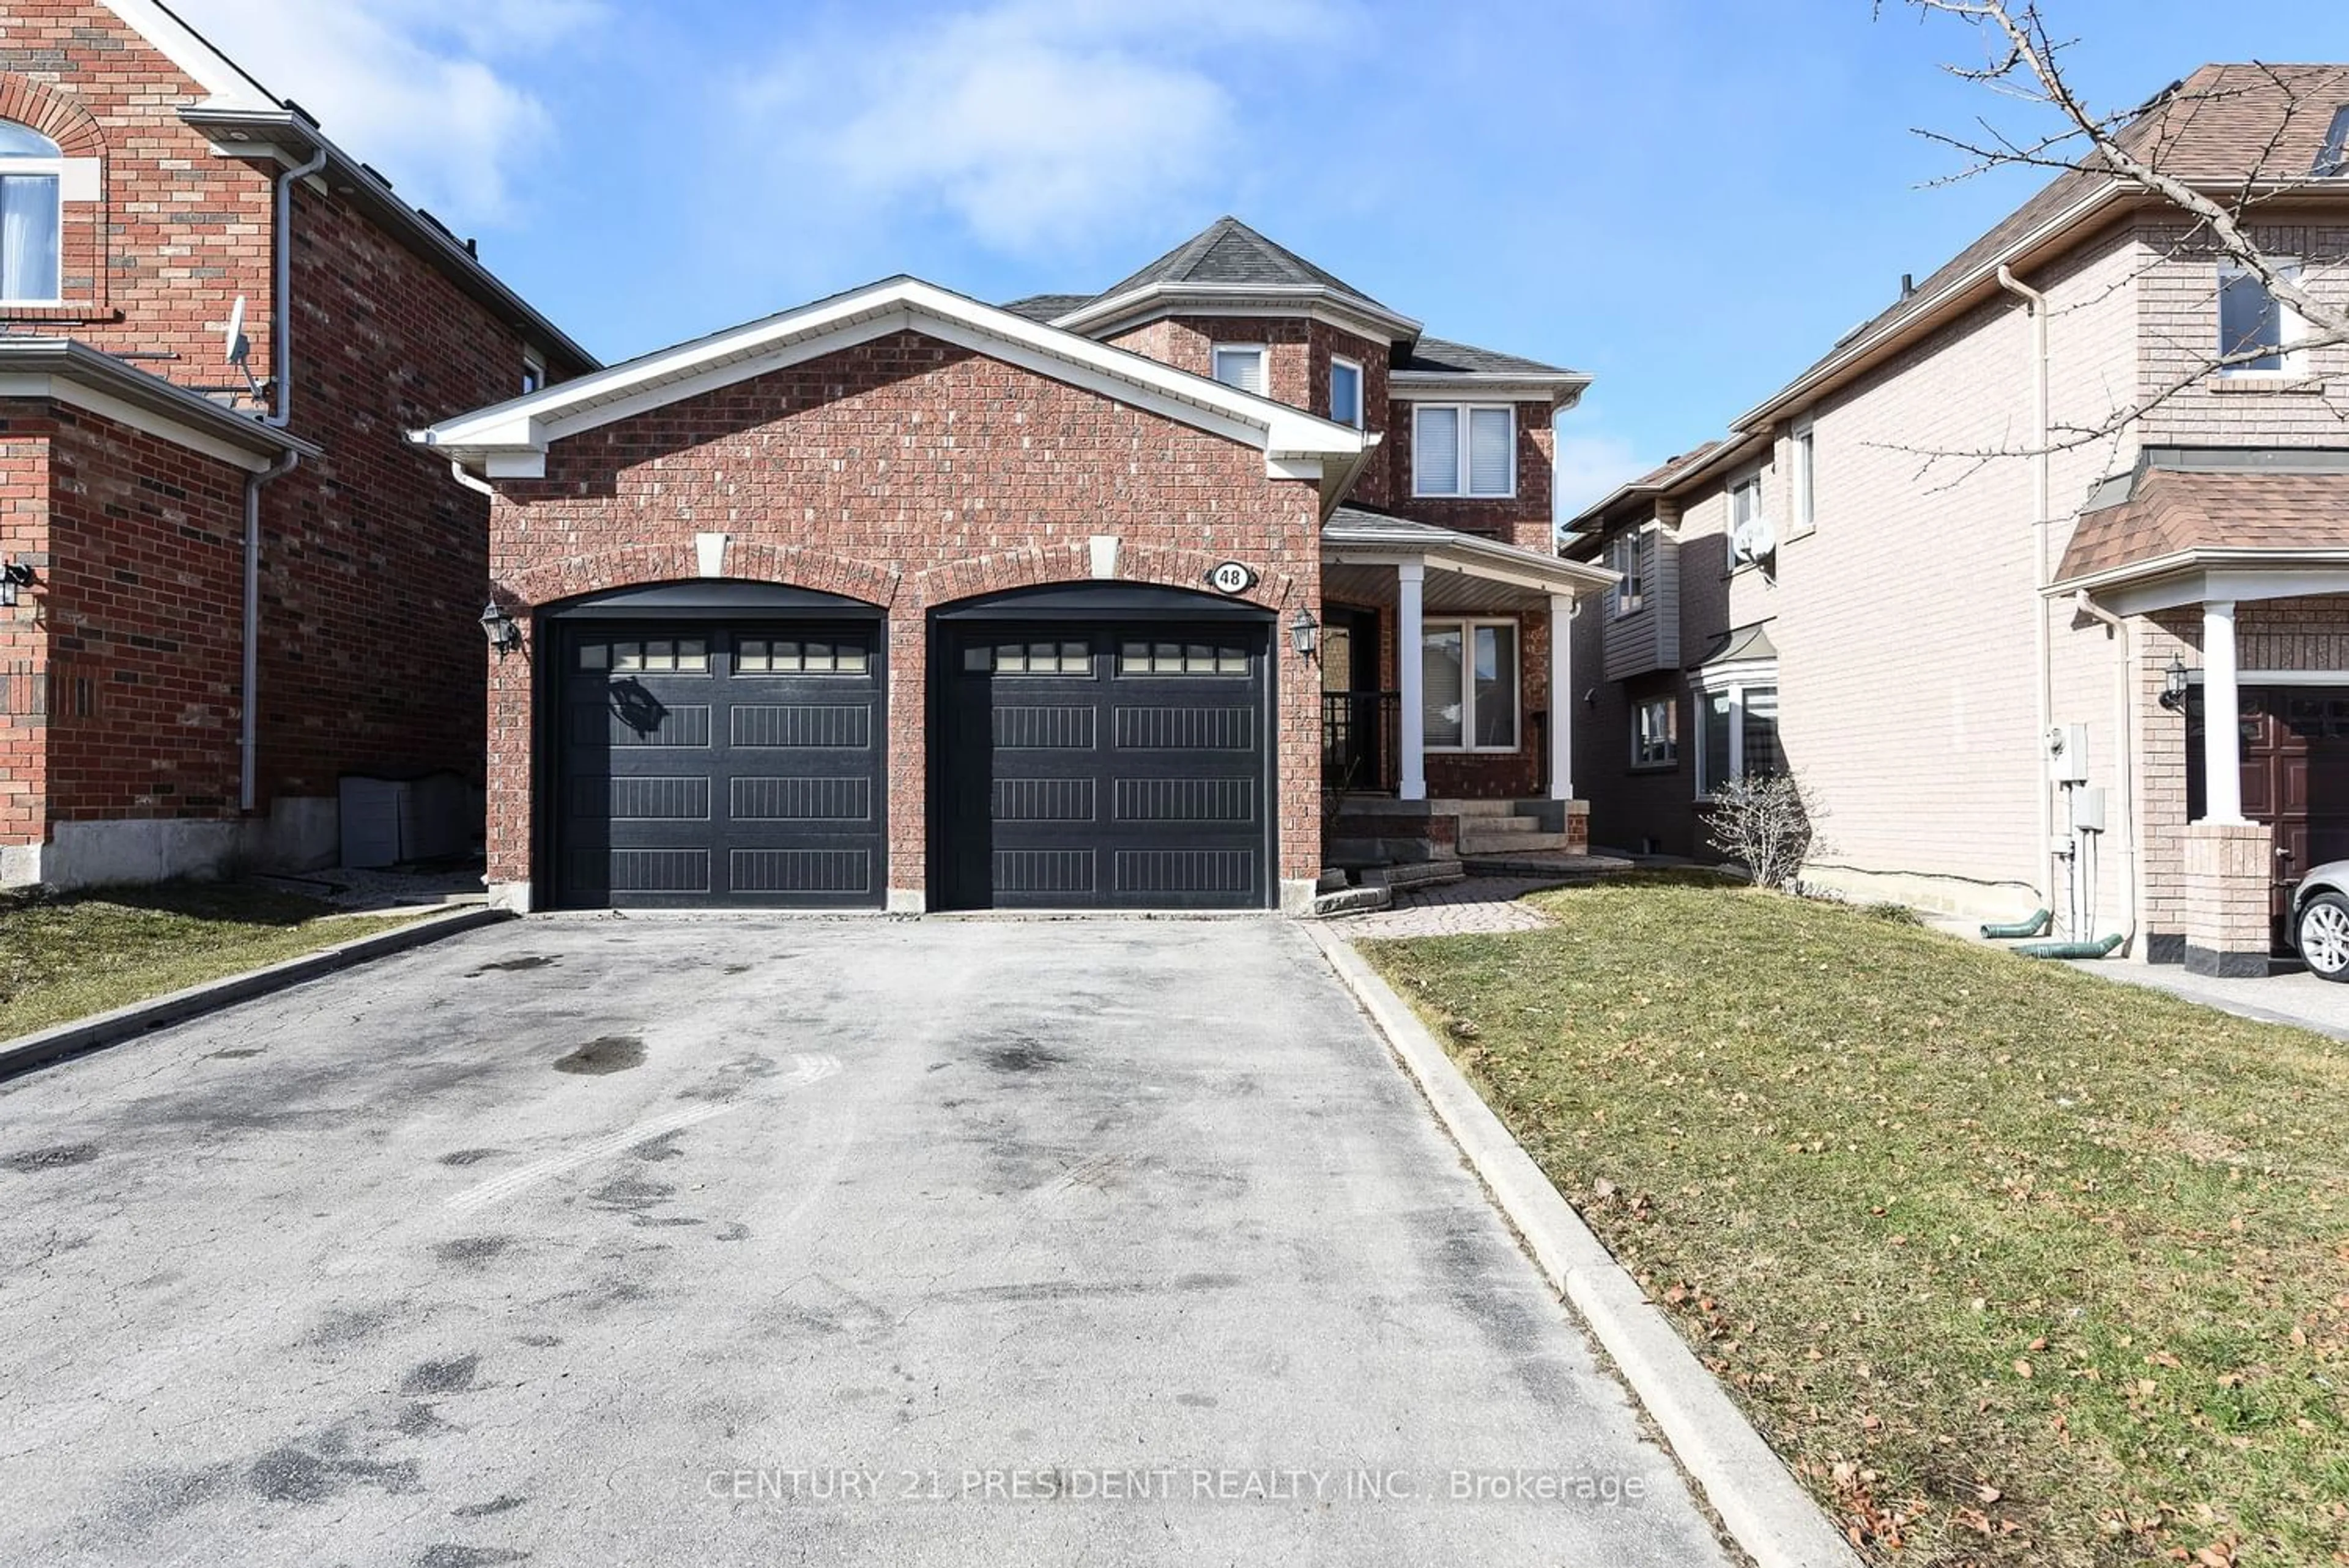 Home with brick exterior material for 48 Snow Leopard Crt, Brampton Ontario L6R 2L9